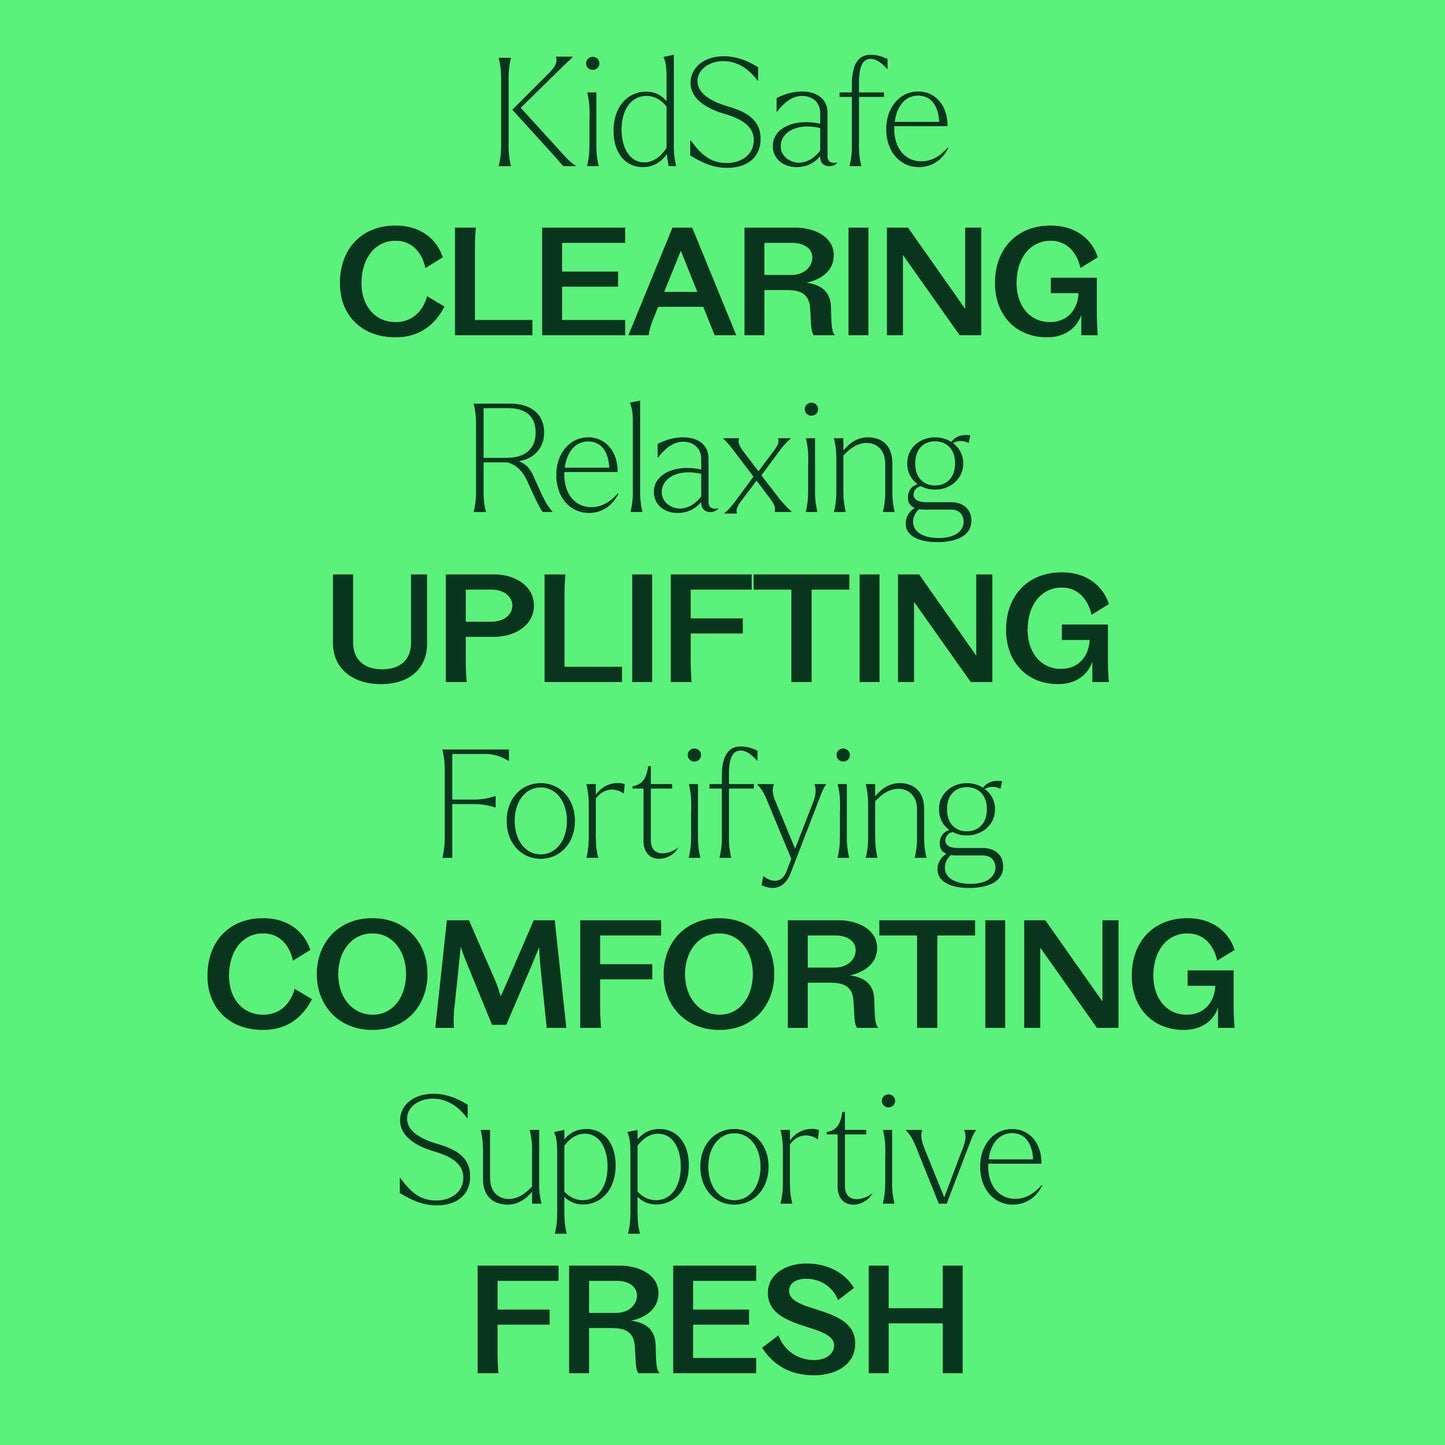 Key features of KidSafe Starter Pack 10 mL: KidSafe, Clearing, Relaxing, Uplifting, Fortifying, Comforting, Supportive, Fresh